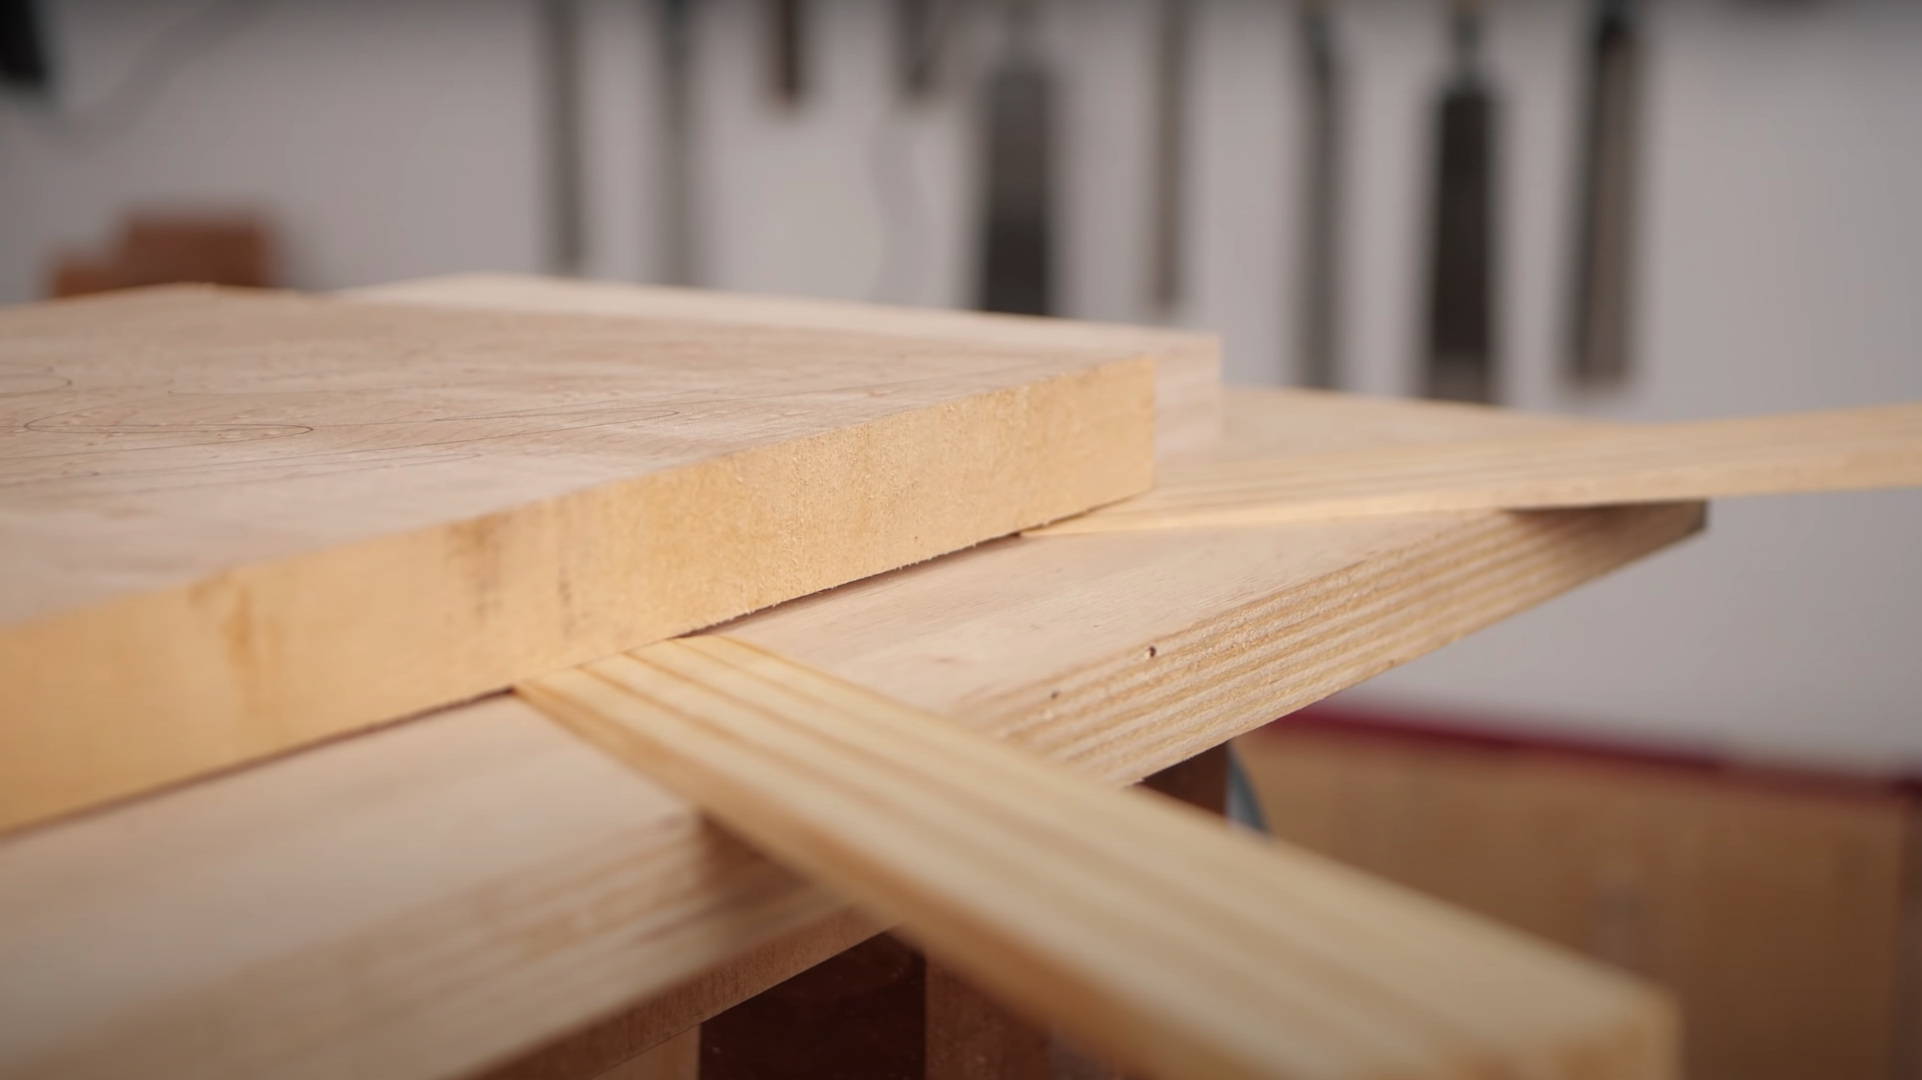 Using shims on a planer jointing jig